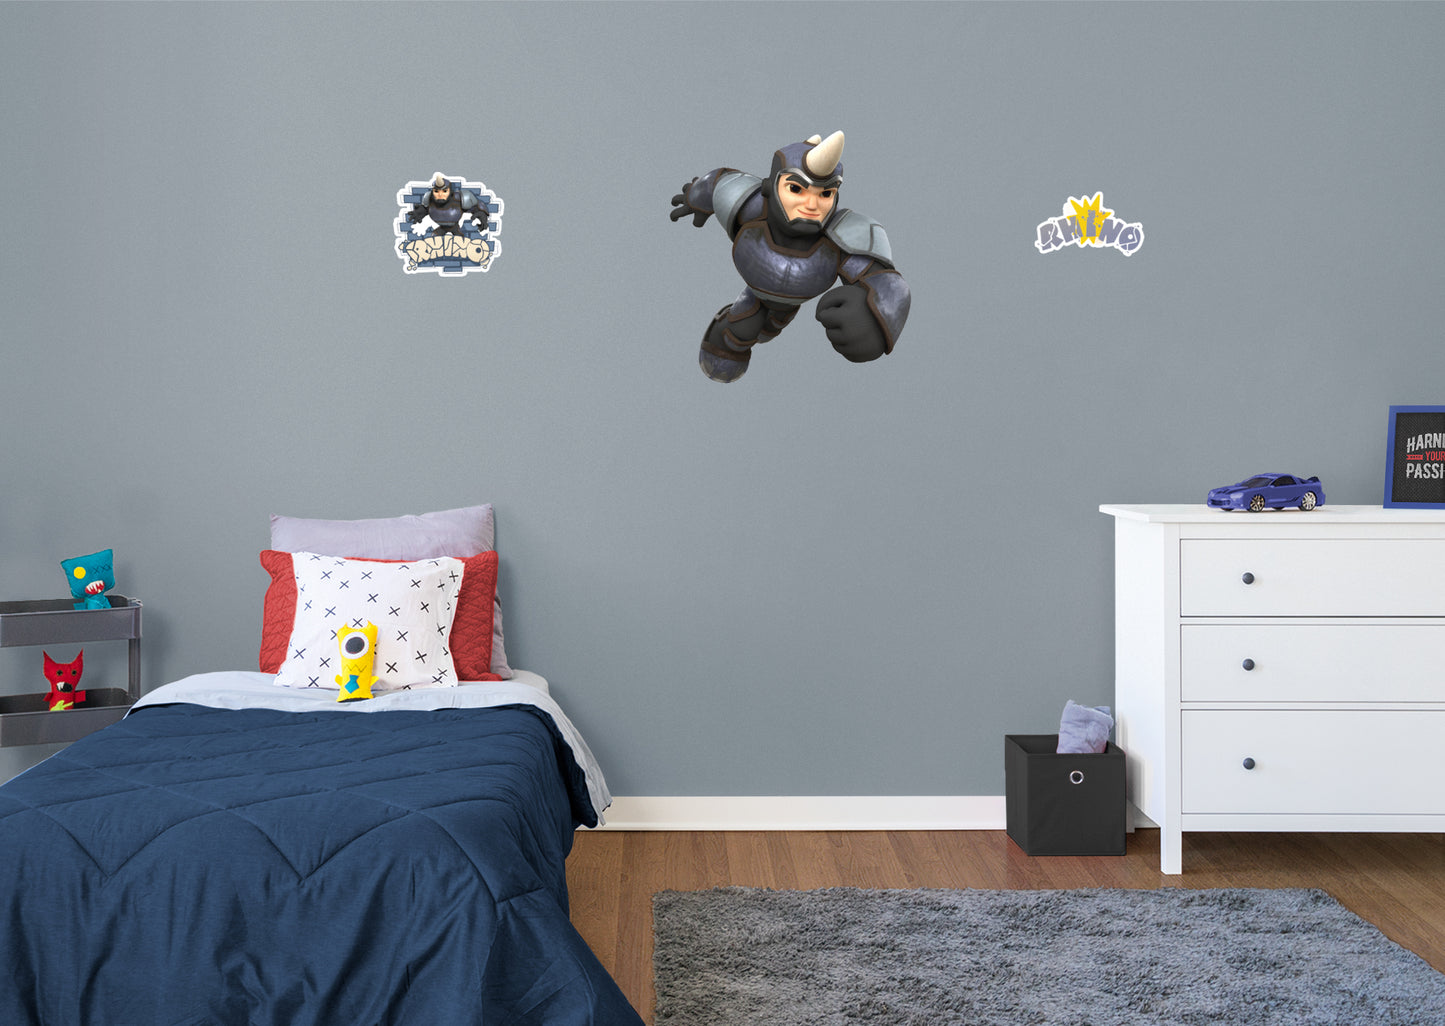 Spidey and his Amazing Friends: Rhino RealBig - Officially Licensed Marvel Removable Adhesive Decal